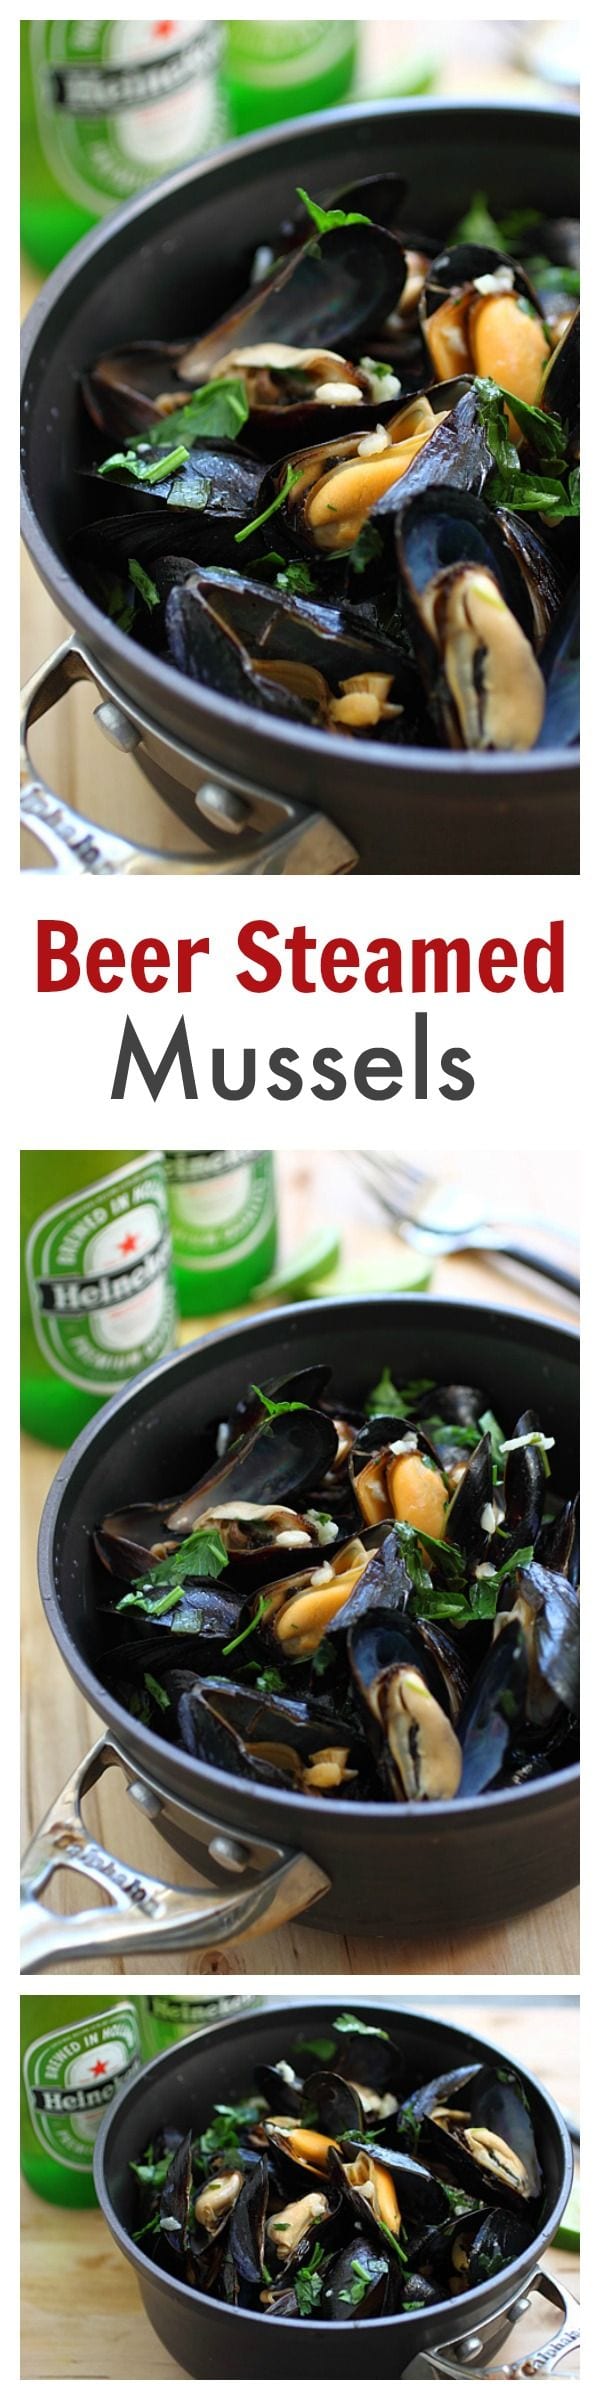 Beer Steamed Mussels - DELICIOUS mussels cooked with beer and garlic herb. So good, MUCH cheaper than restaurants and ready in 10 mins | rasamalaysia.com